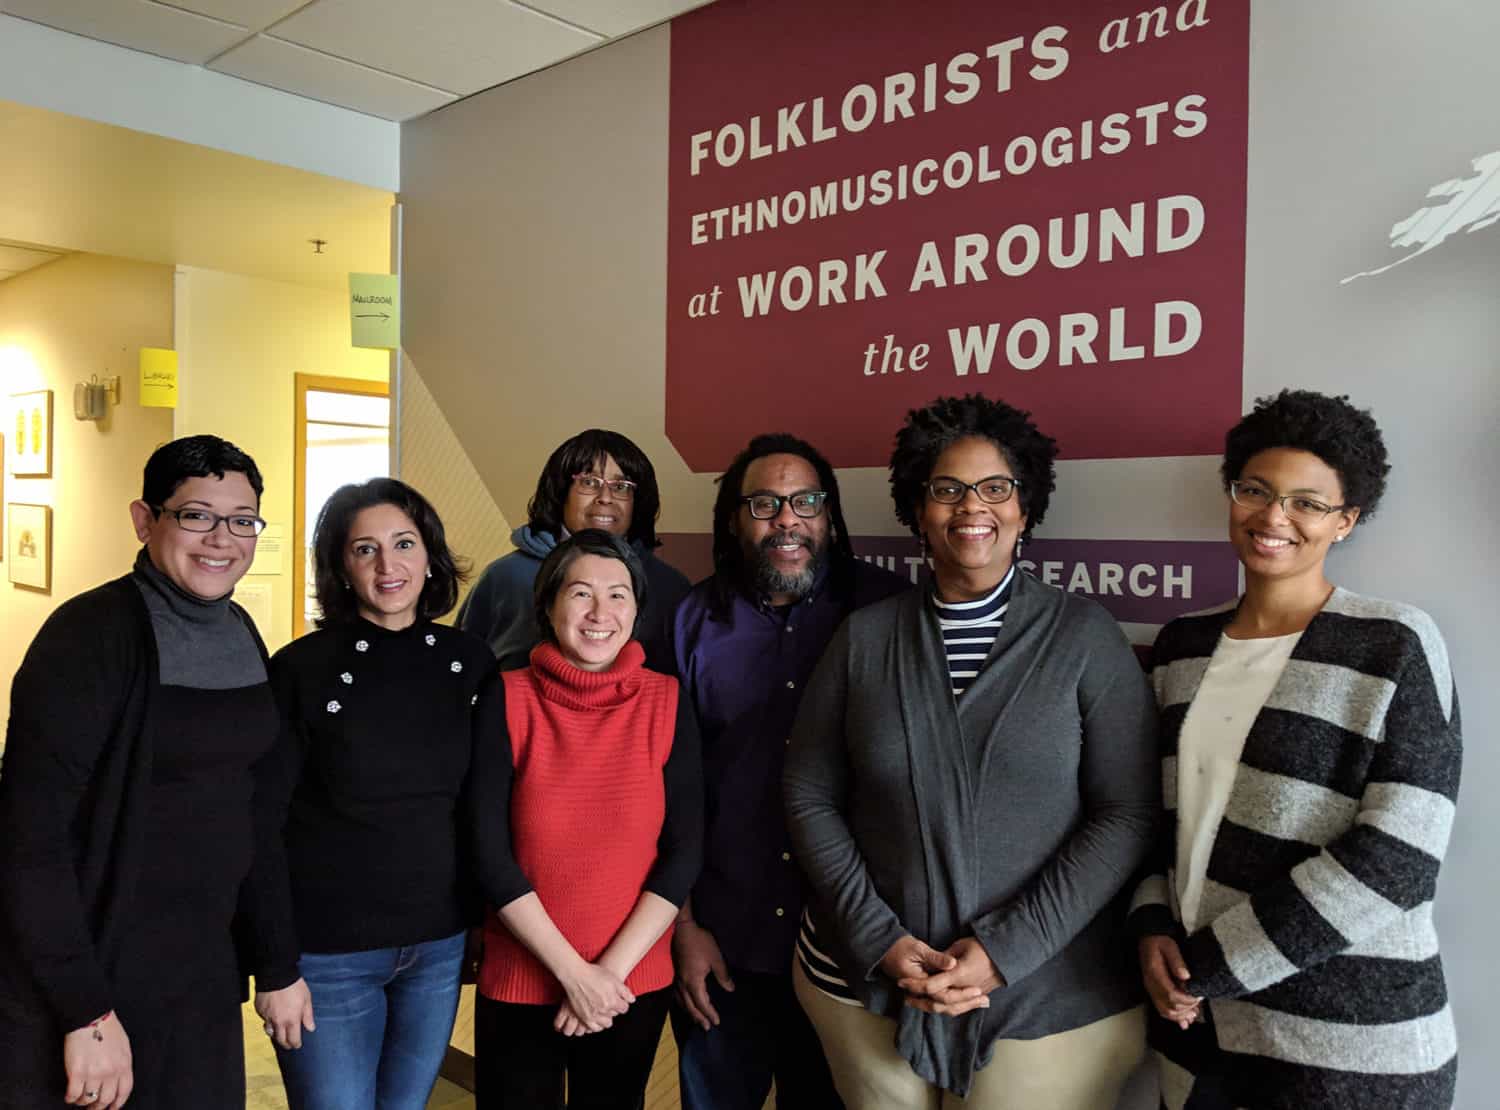 A smiling group stands in front of a sign that reads "Folklorists and Ethnomusicologists at Work Around the World"